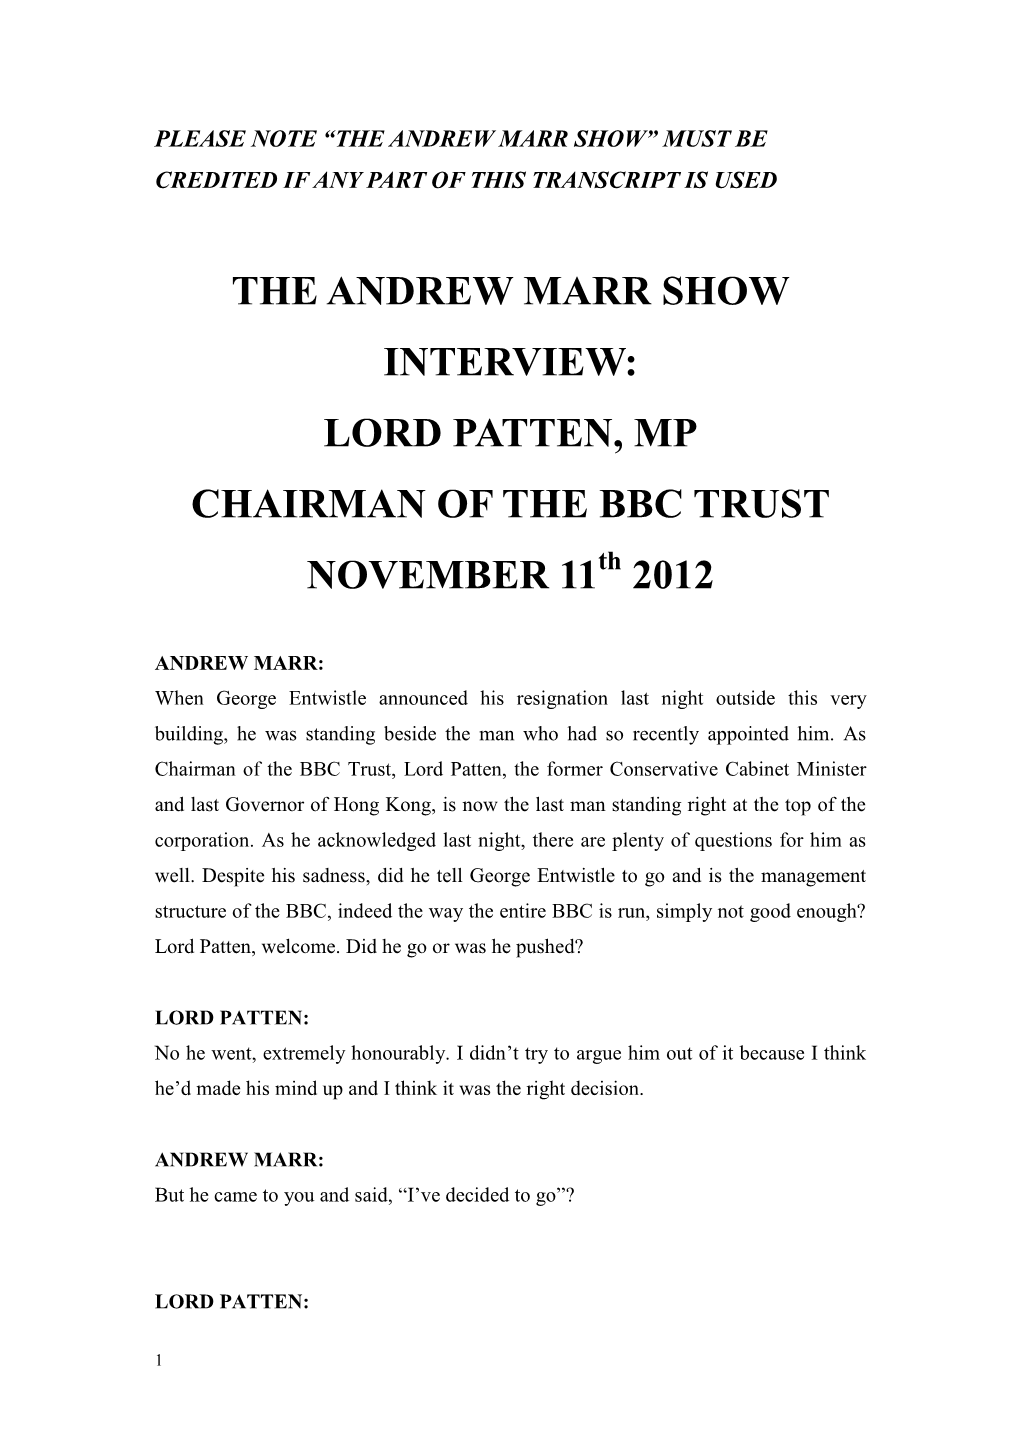 THE ANDREW MARR SHOW INTERVIEW: LORD PATTEN, MP CHAIRMAN of the BBC TRUST NOVEMBER 11Th 2012